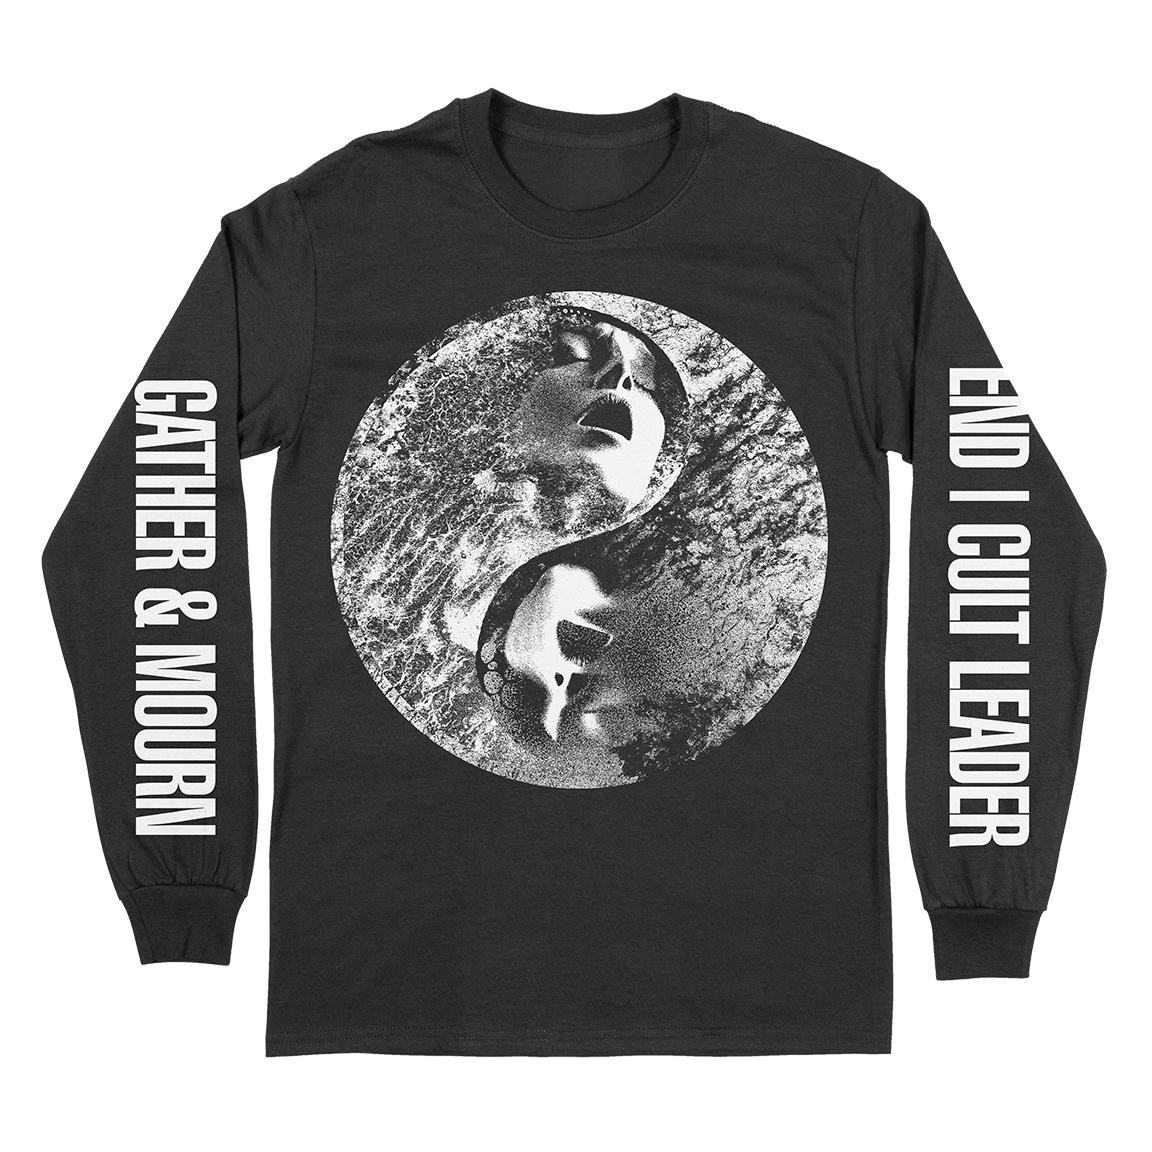 END - Gather & Mourn Long Sleeve White